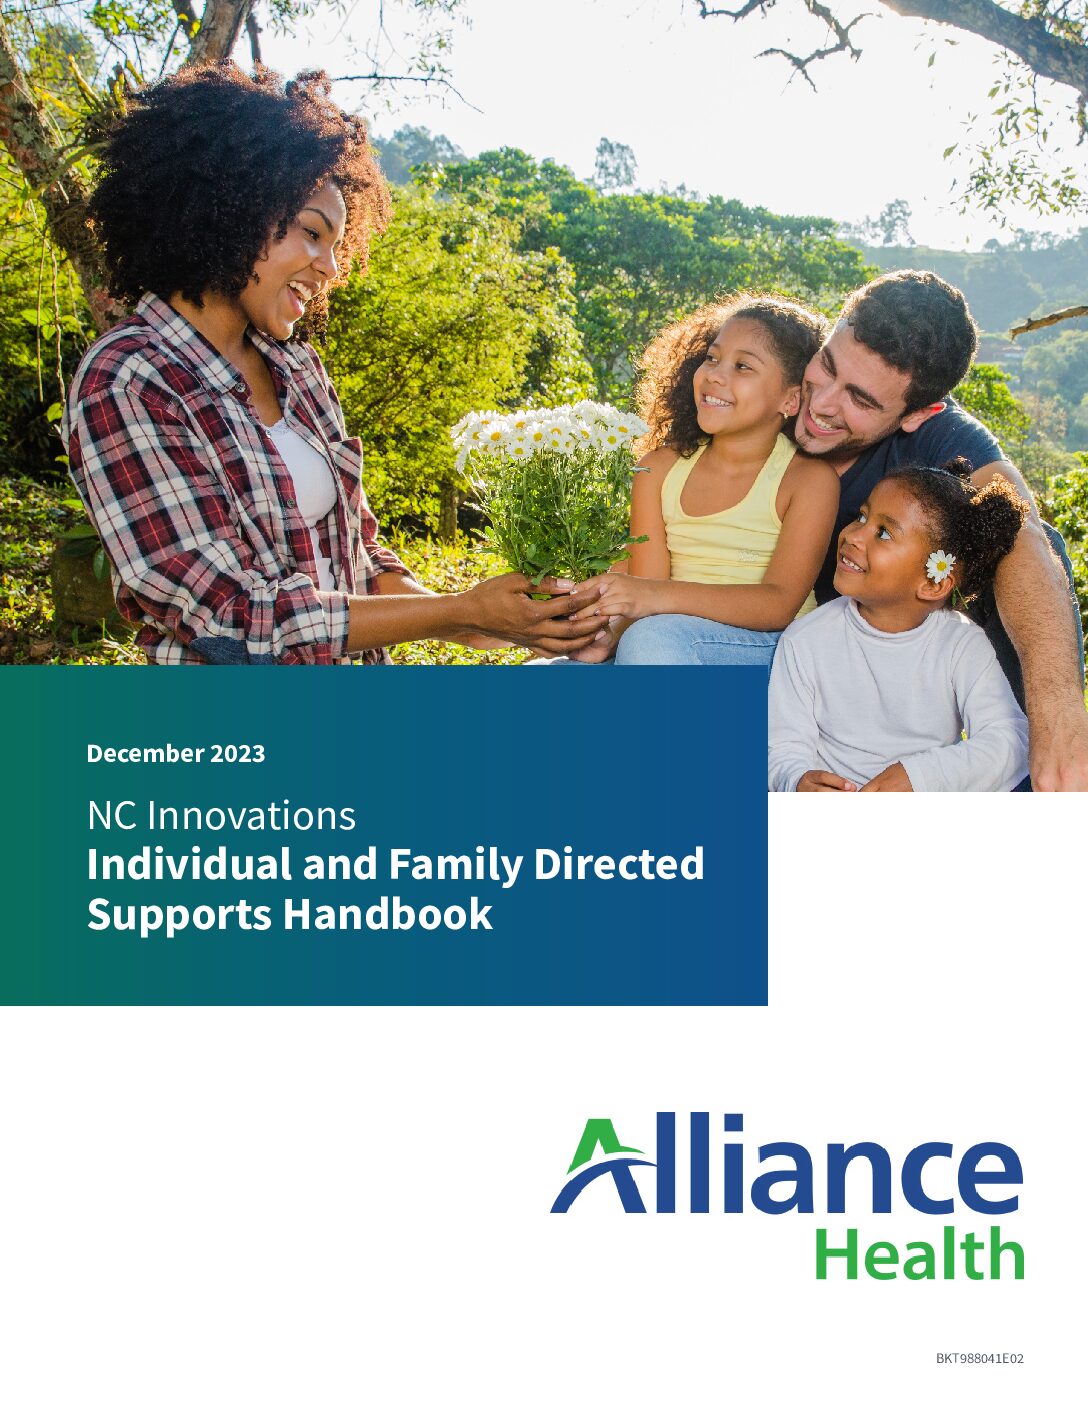 NC Innovations Individual and Family Directed Supports Handbook